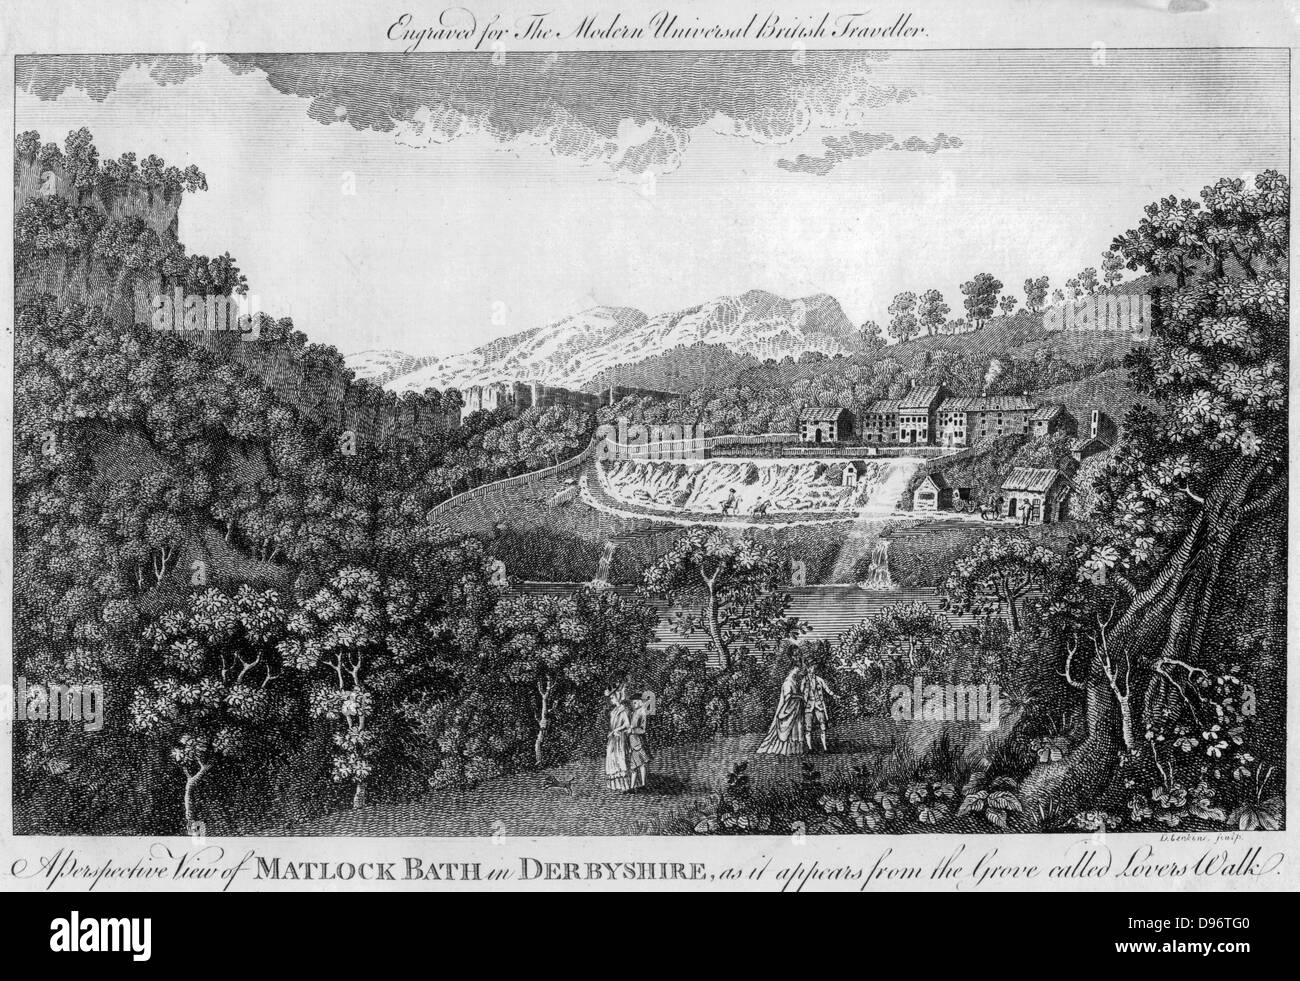 Matlock Spa, Derbyshire, England. From a copperplate print published in the latter part of the 18th century when it became fashionable to 'Take the waters'. Stock Photo